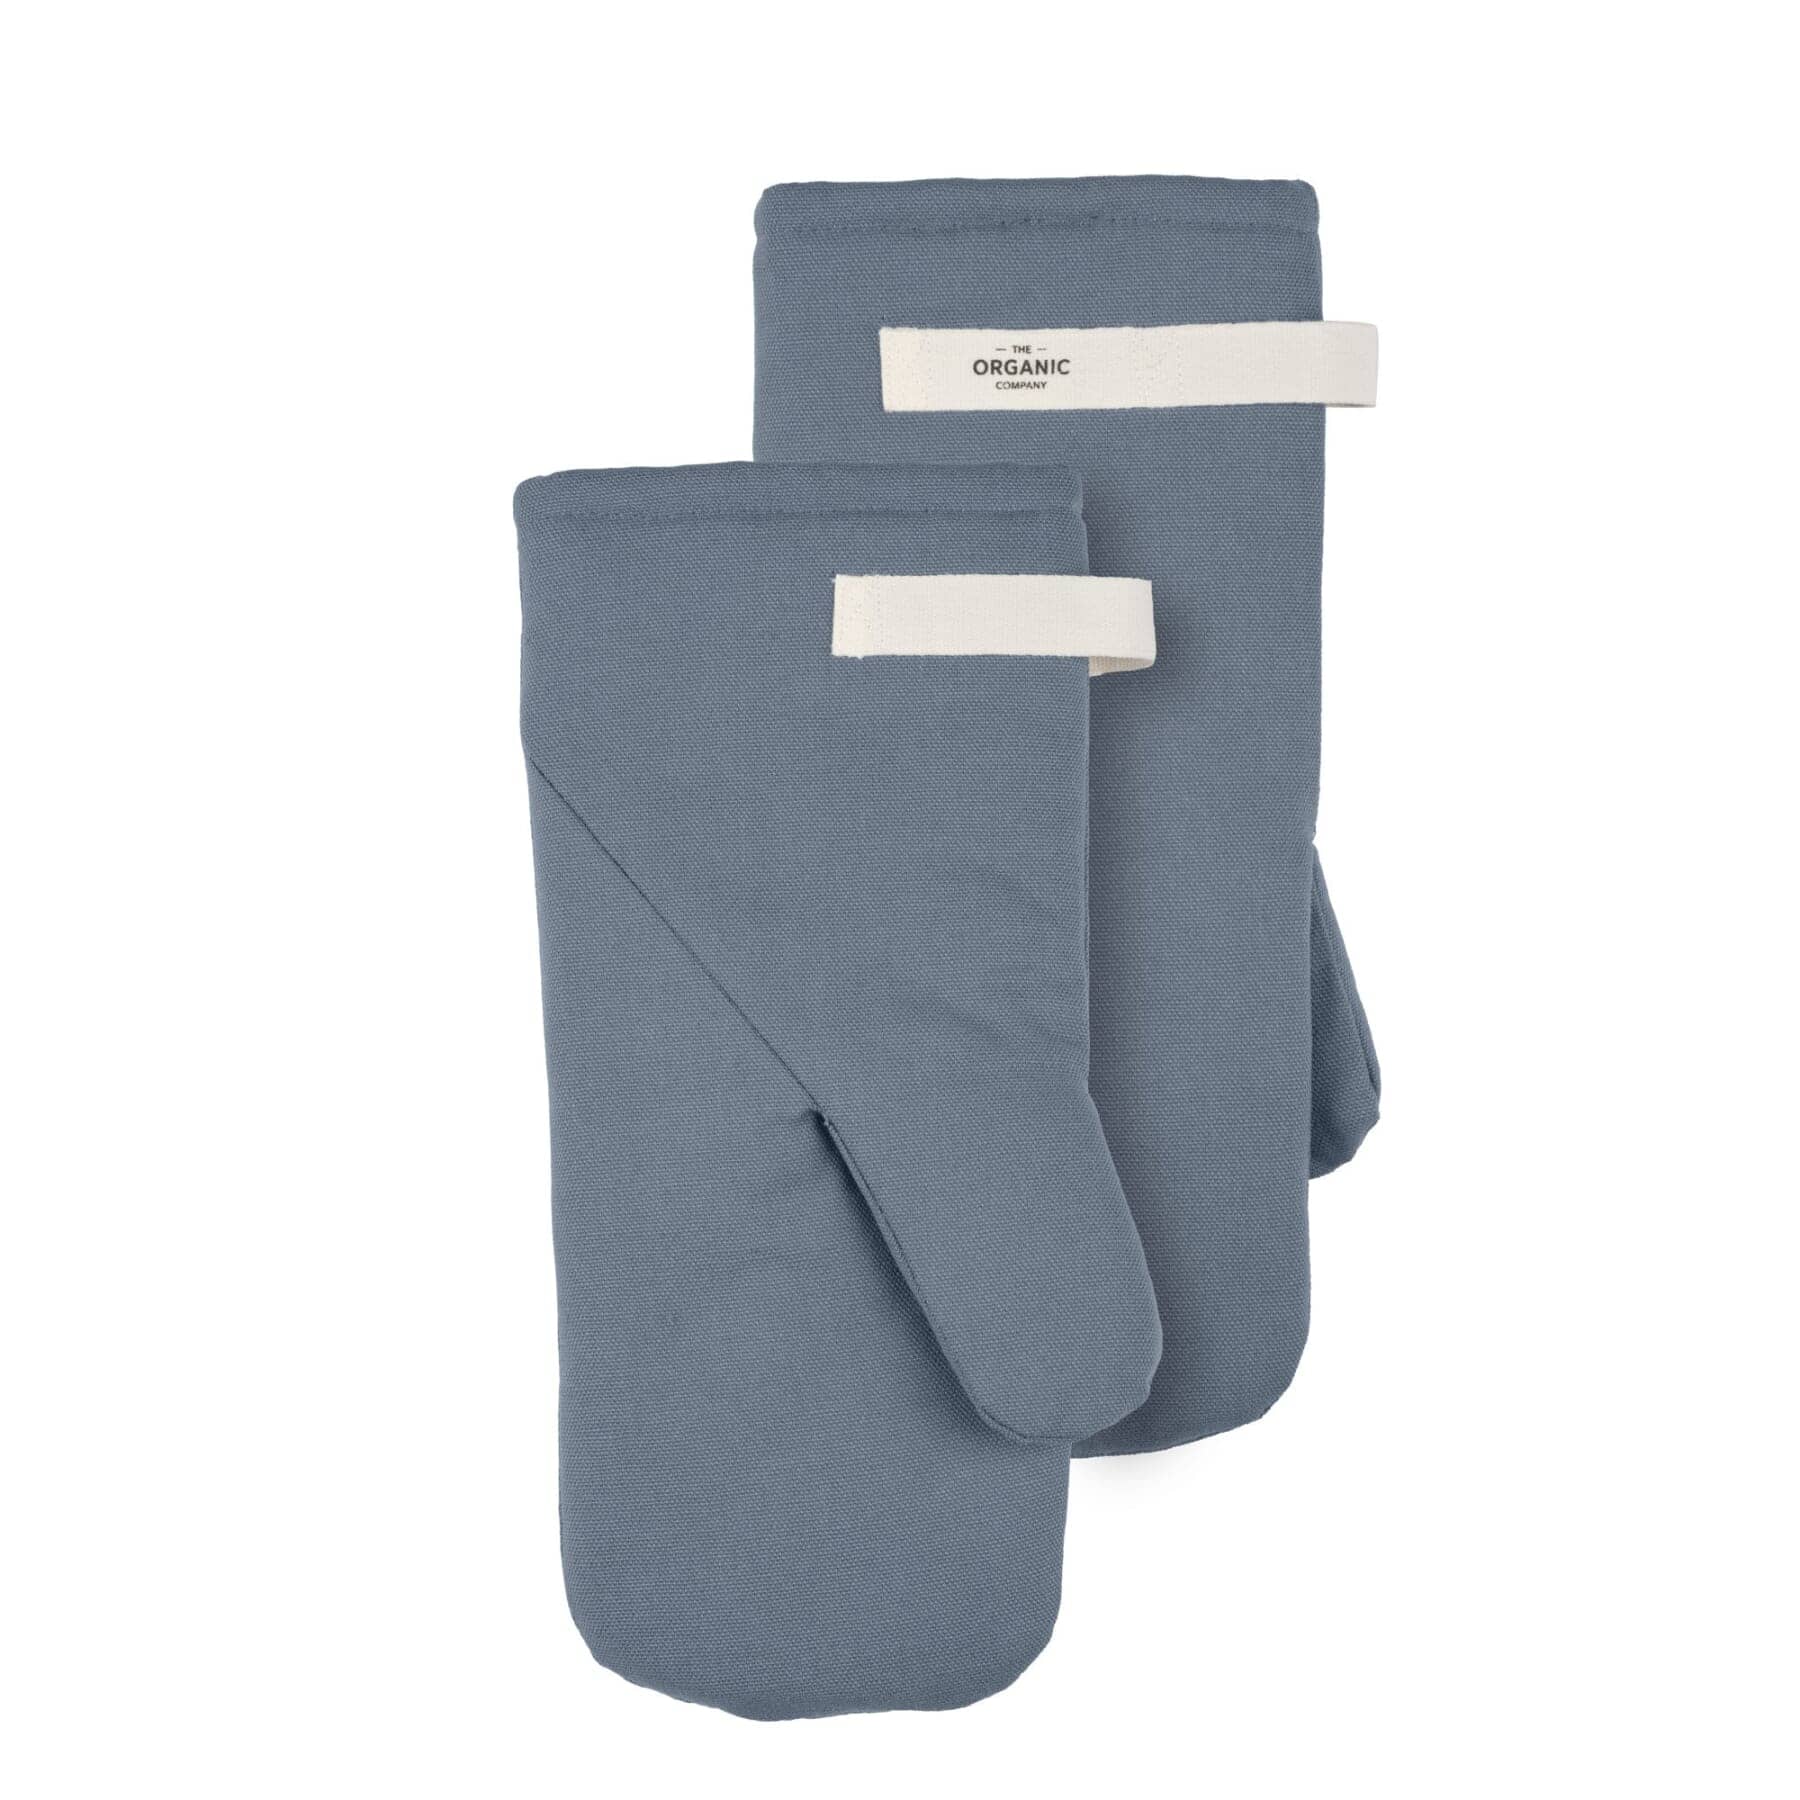 The Organic Company Grillhandsker - Grey Blue